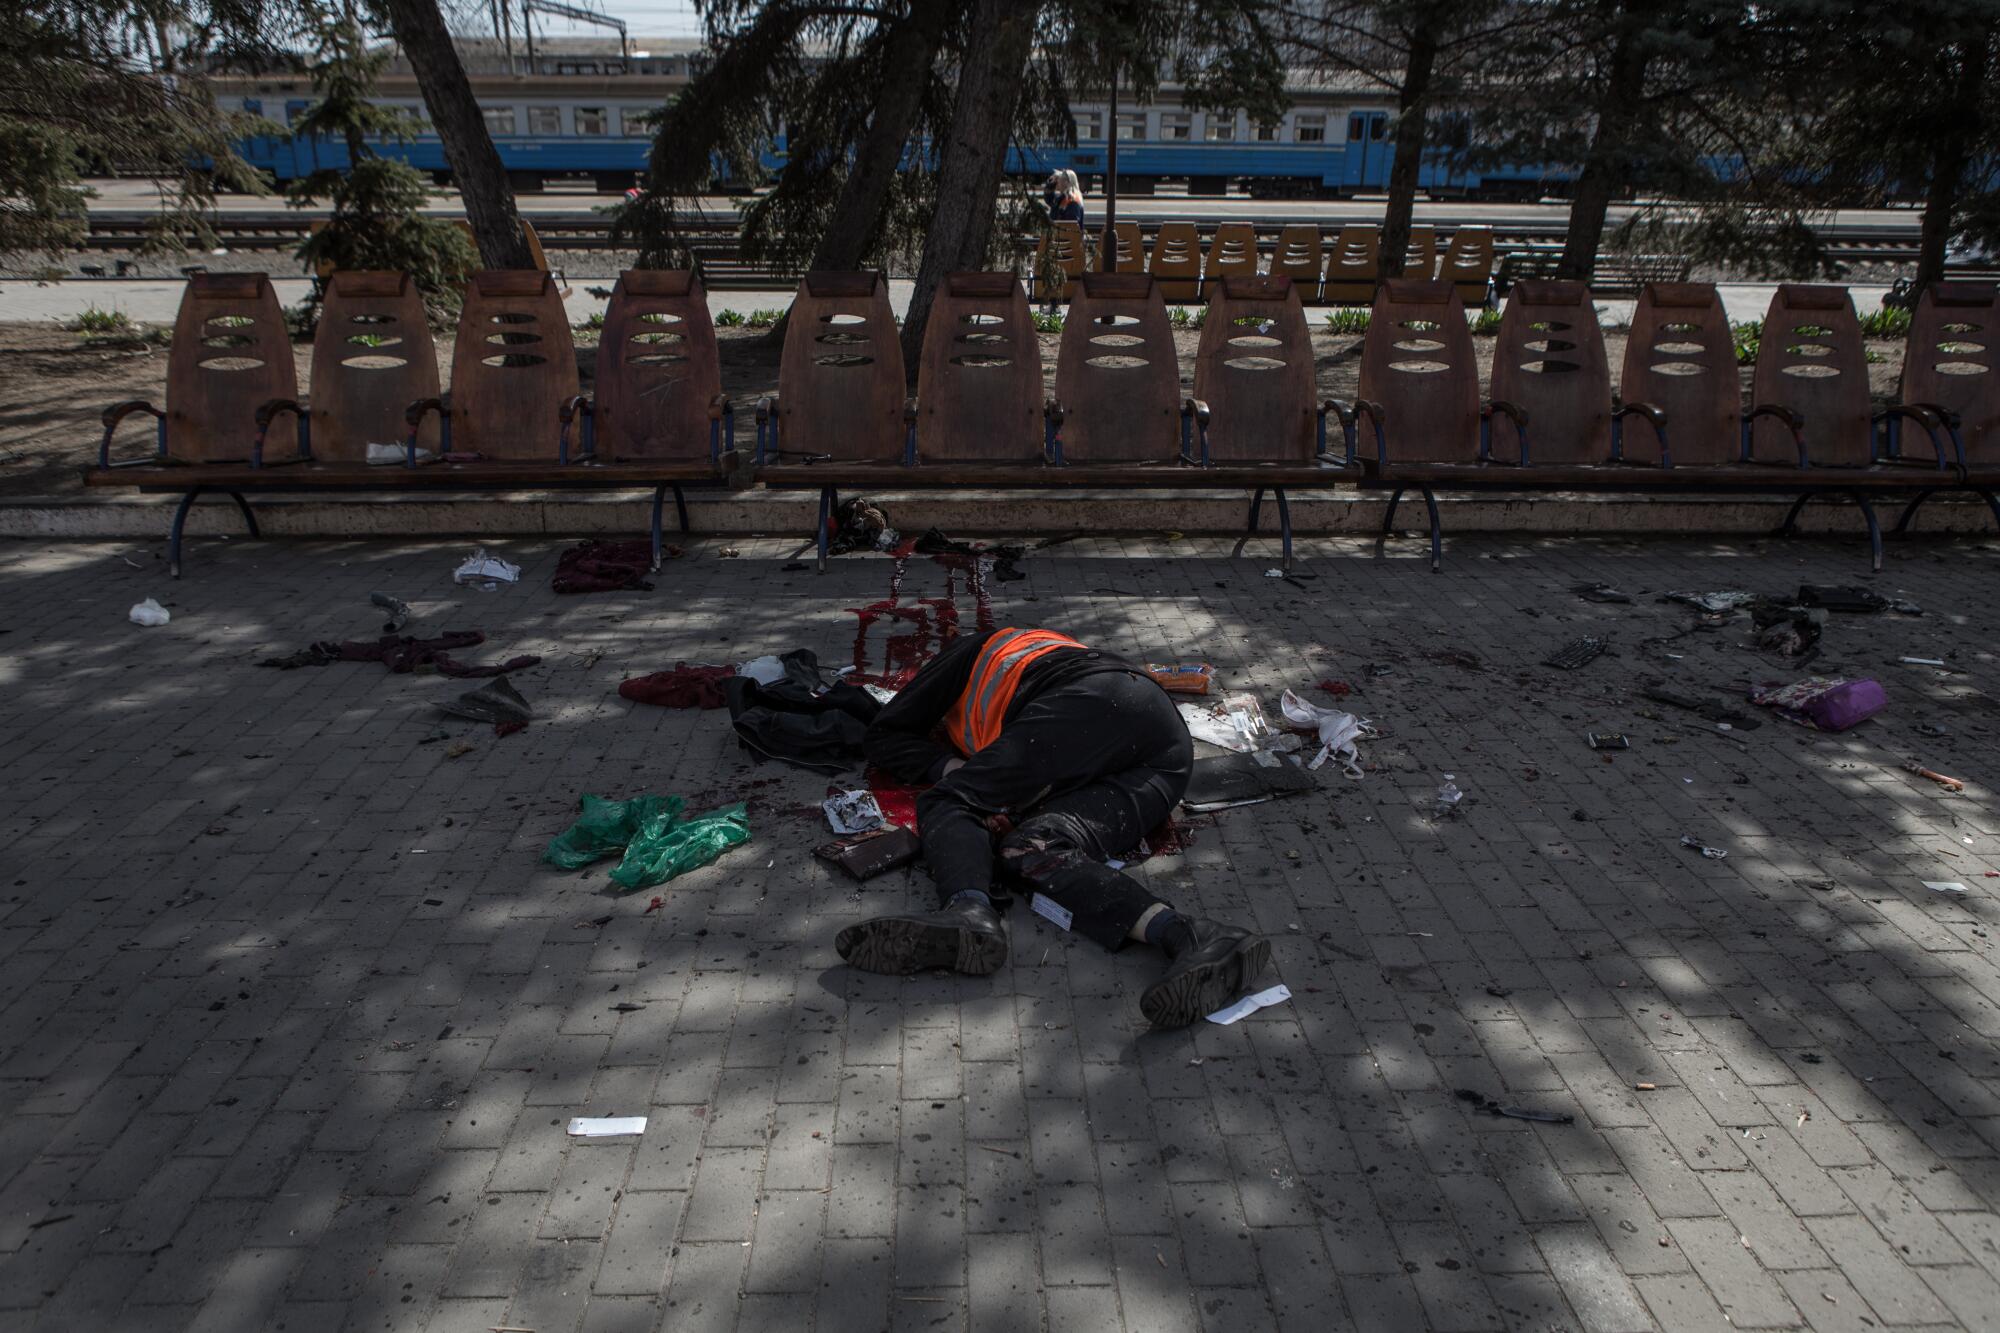 A body lies at the Kramatorsk train station in eastern Ukraine after Friday's Russian rocket attack.